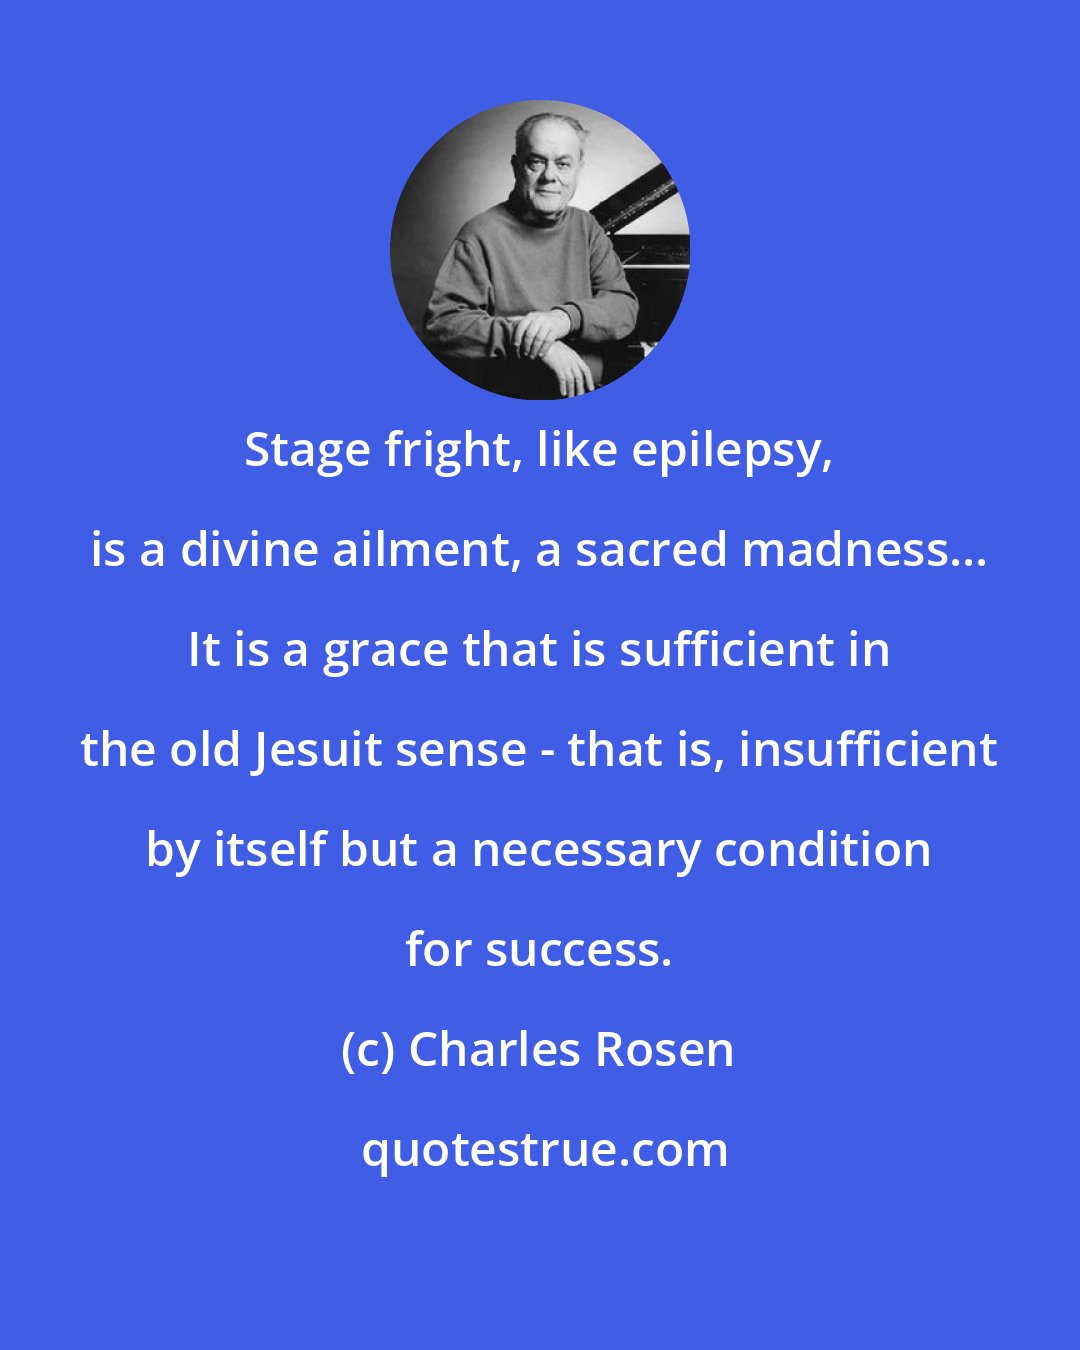 Charles Rosen: Stage fright, like epilepsy, is a divine ailment, a sacred madness... It is a grace that is sufficient in the old Jesuit sense - that is, insufficient by itself but a necessary condition for success.